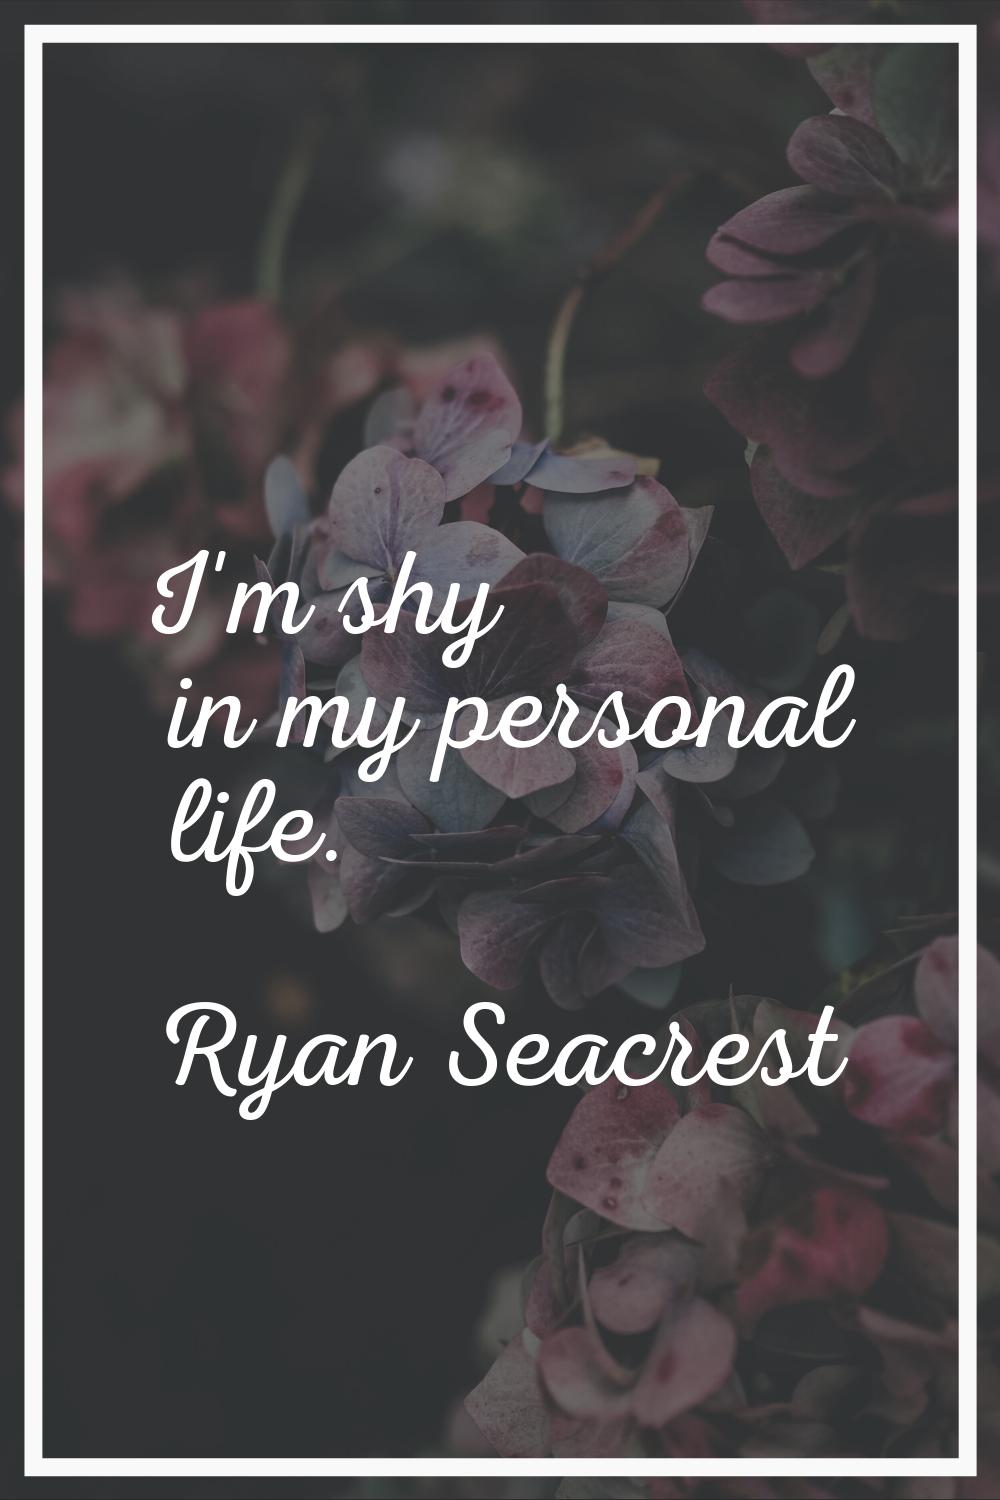 I'm shy in my personal life.